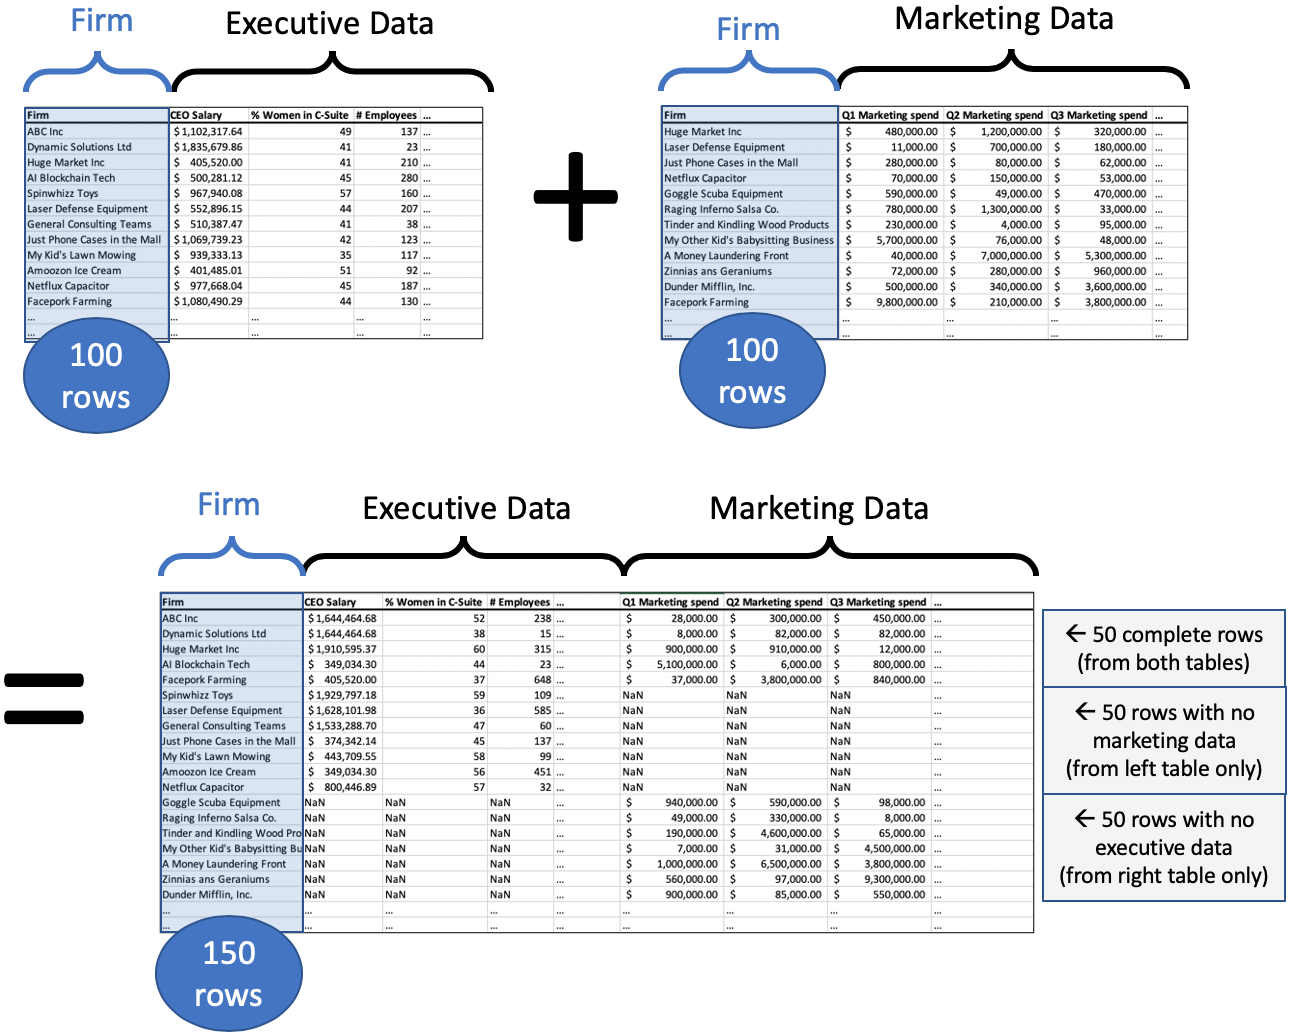 Merging data about corporate executives with data about marketing spending for a fictitious set of firms